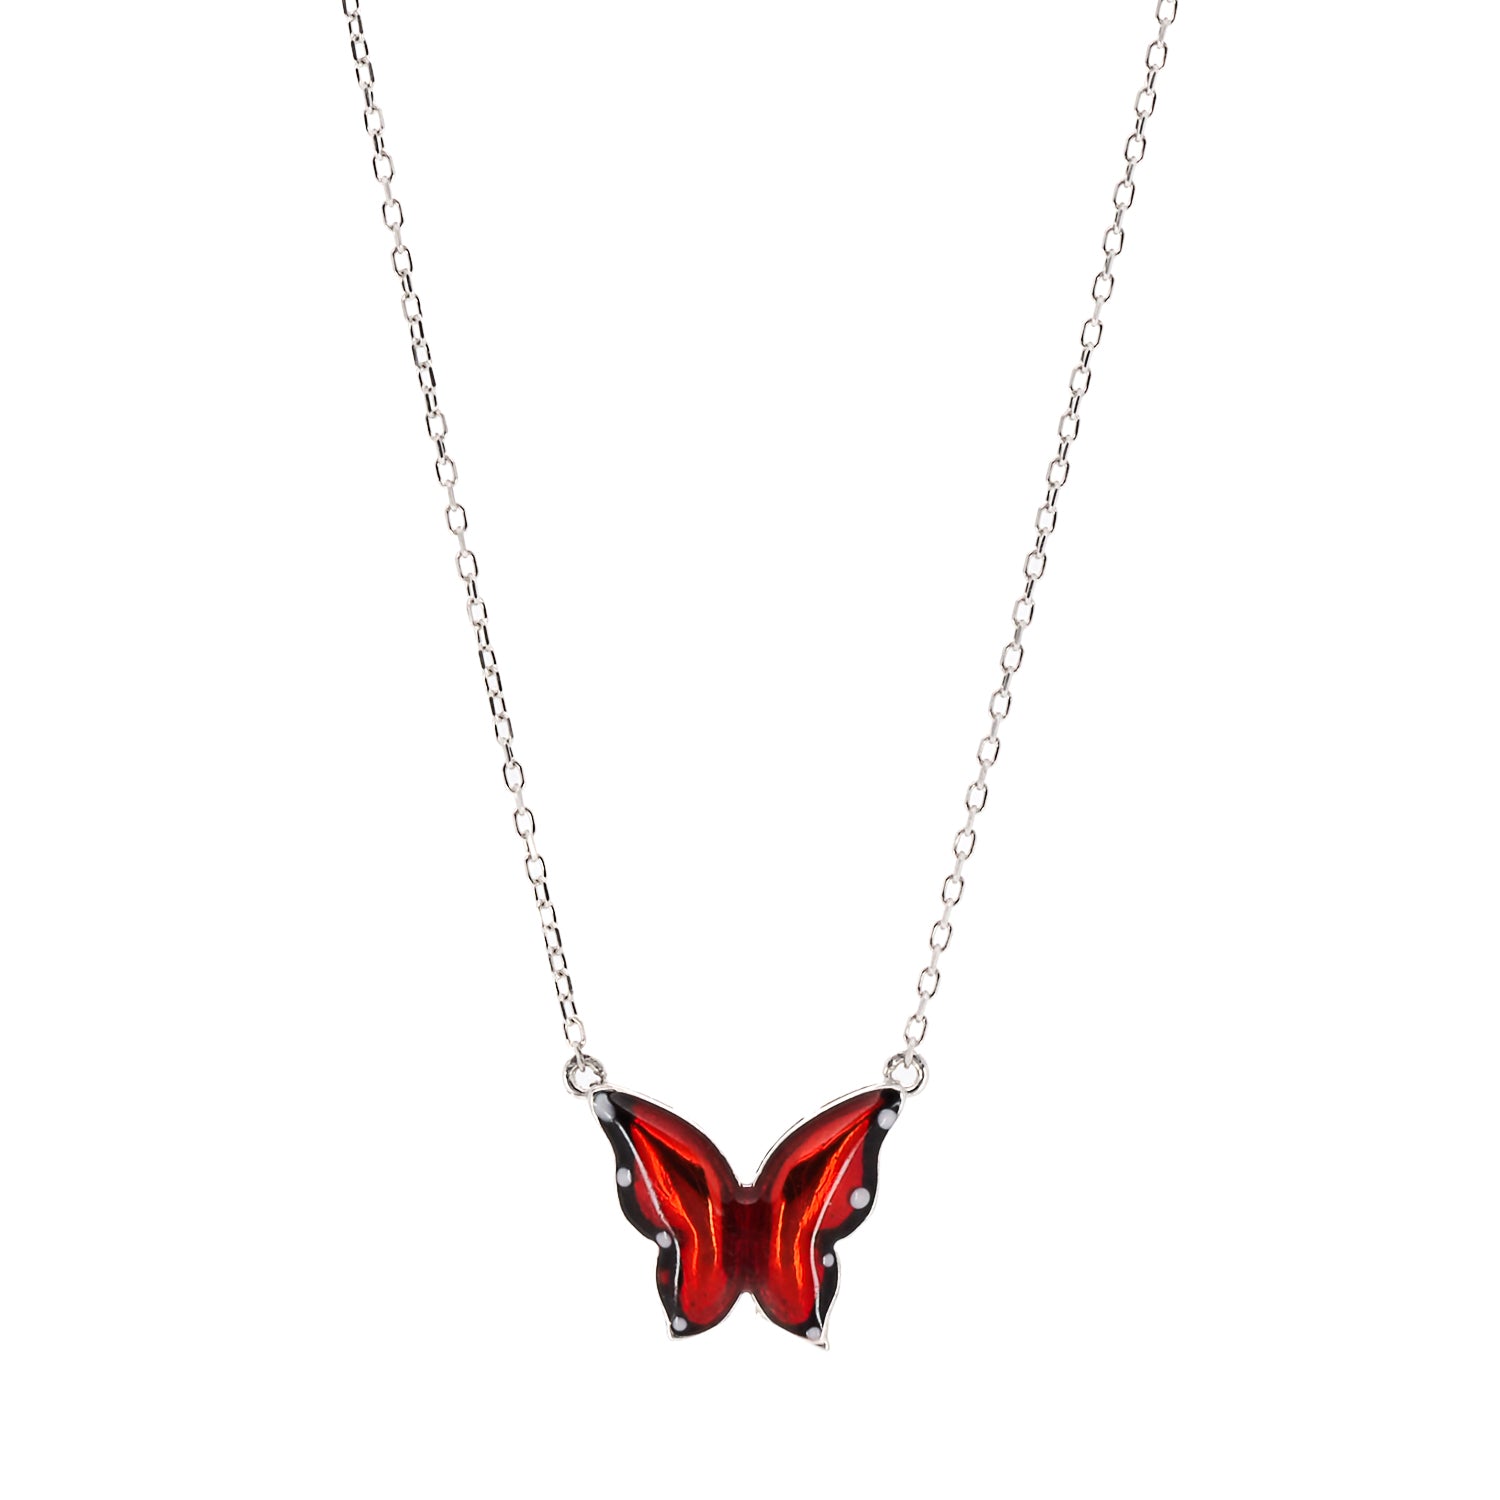 Close-up shot of the intricate red enamel design on the butterfly pendant, symbolizing transformation and spiritual growth.